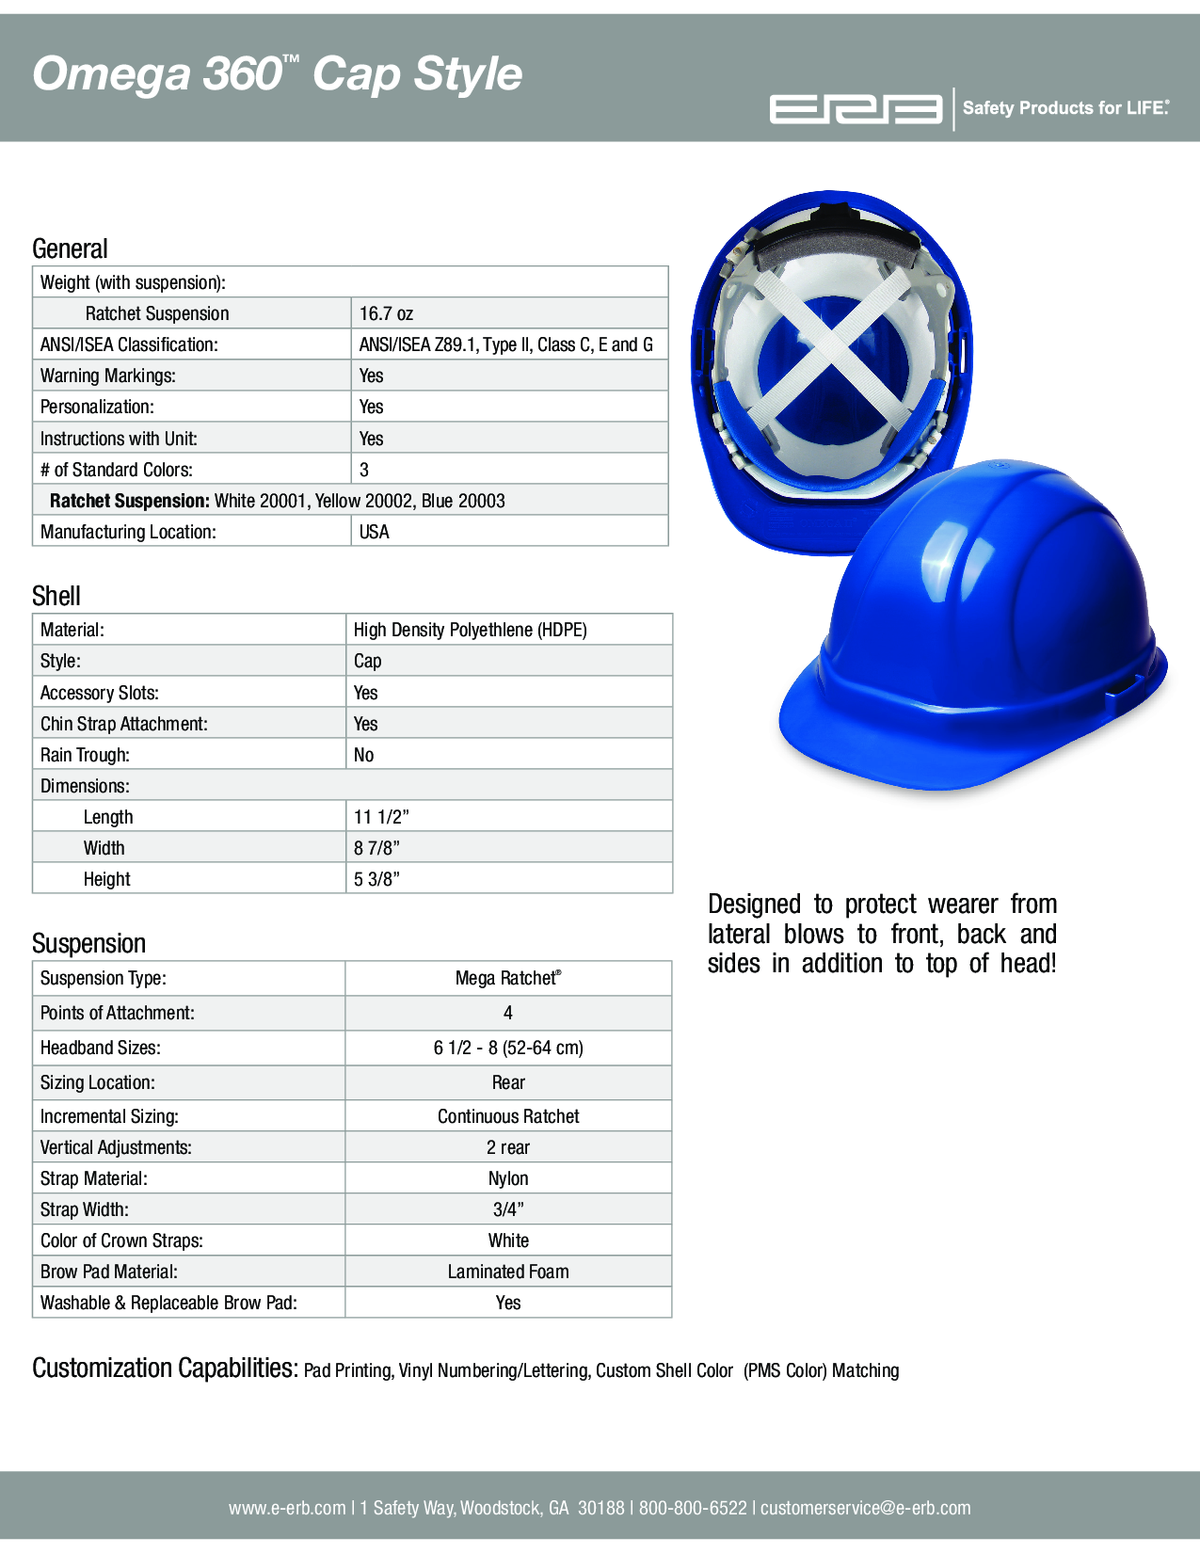 Omega 360® Cap Type II with 4 Point Suspension